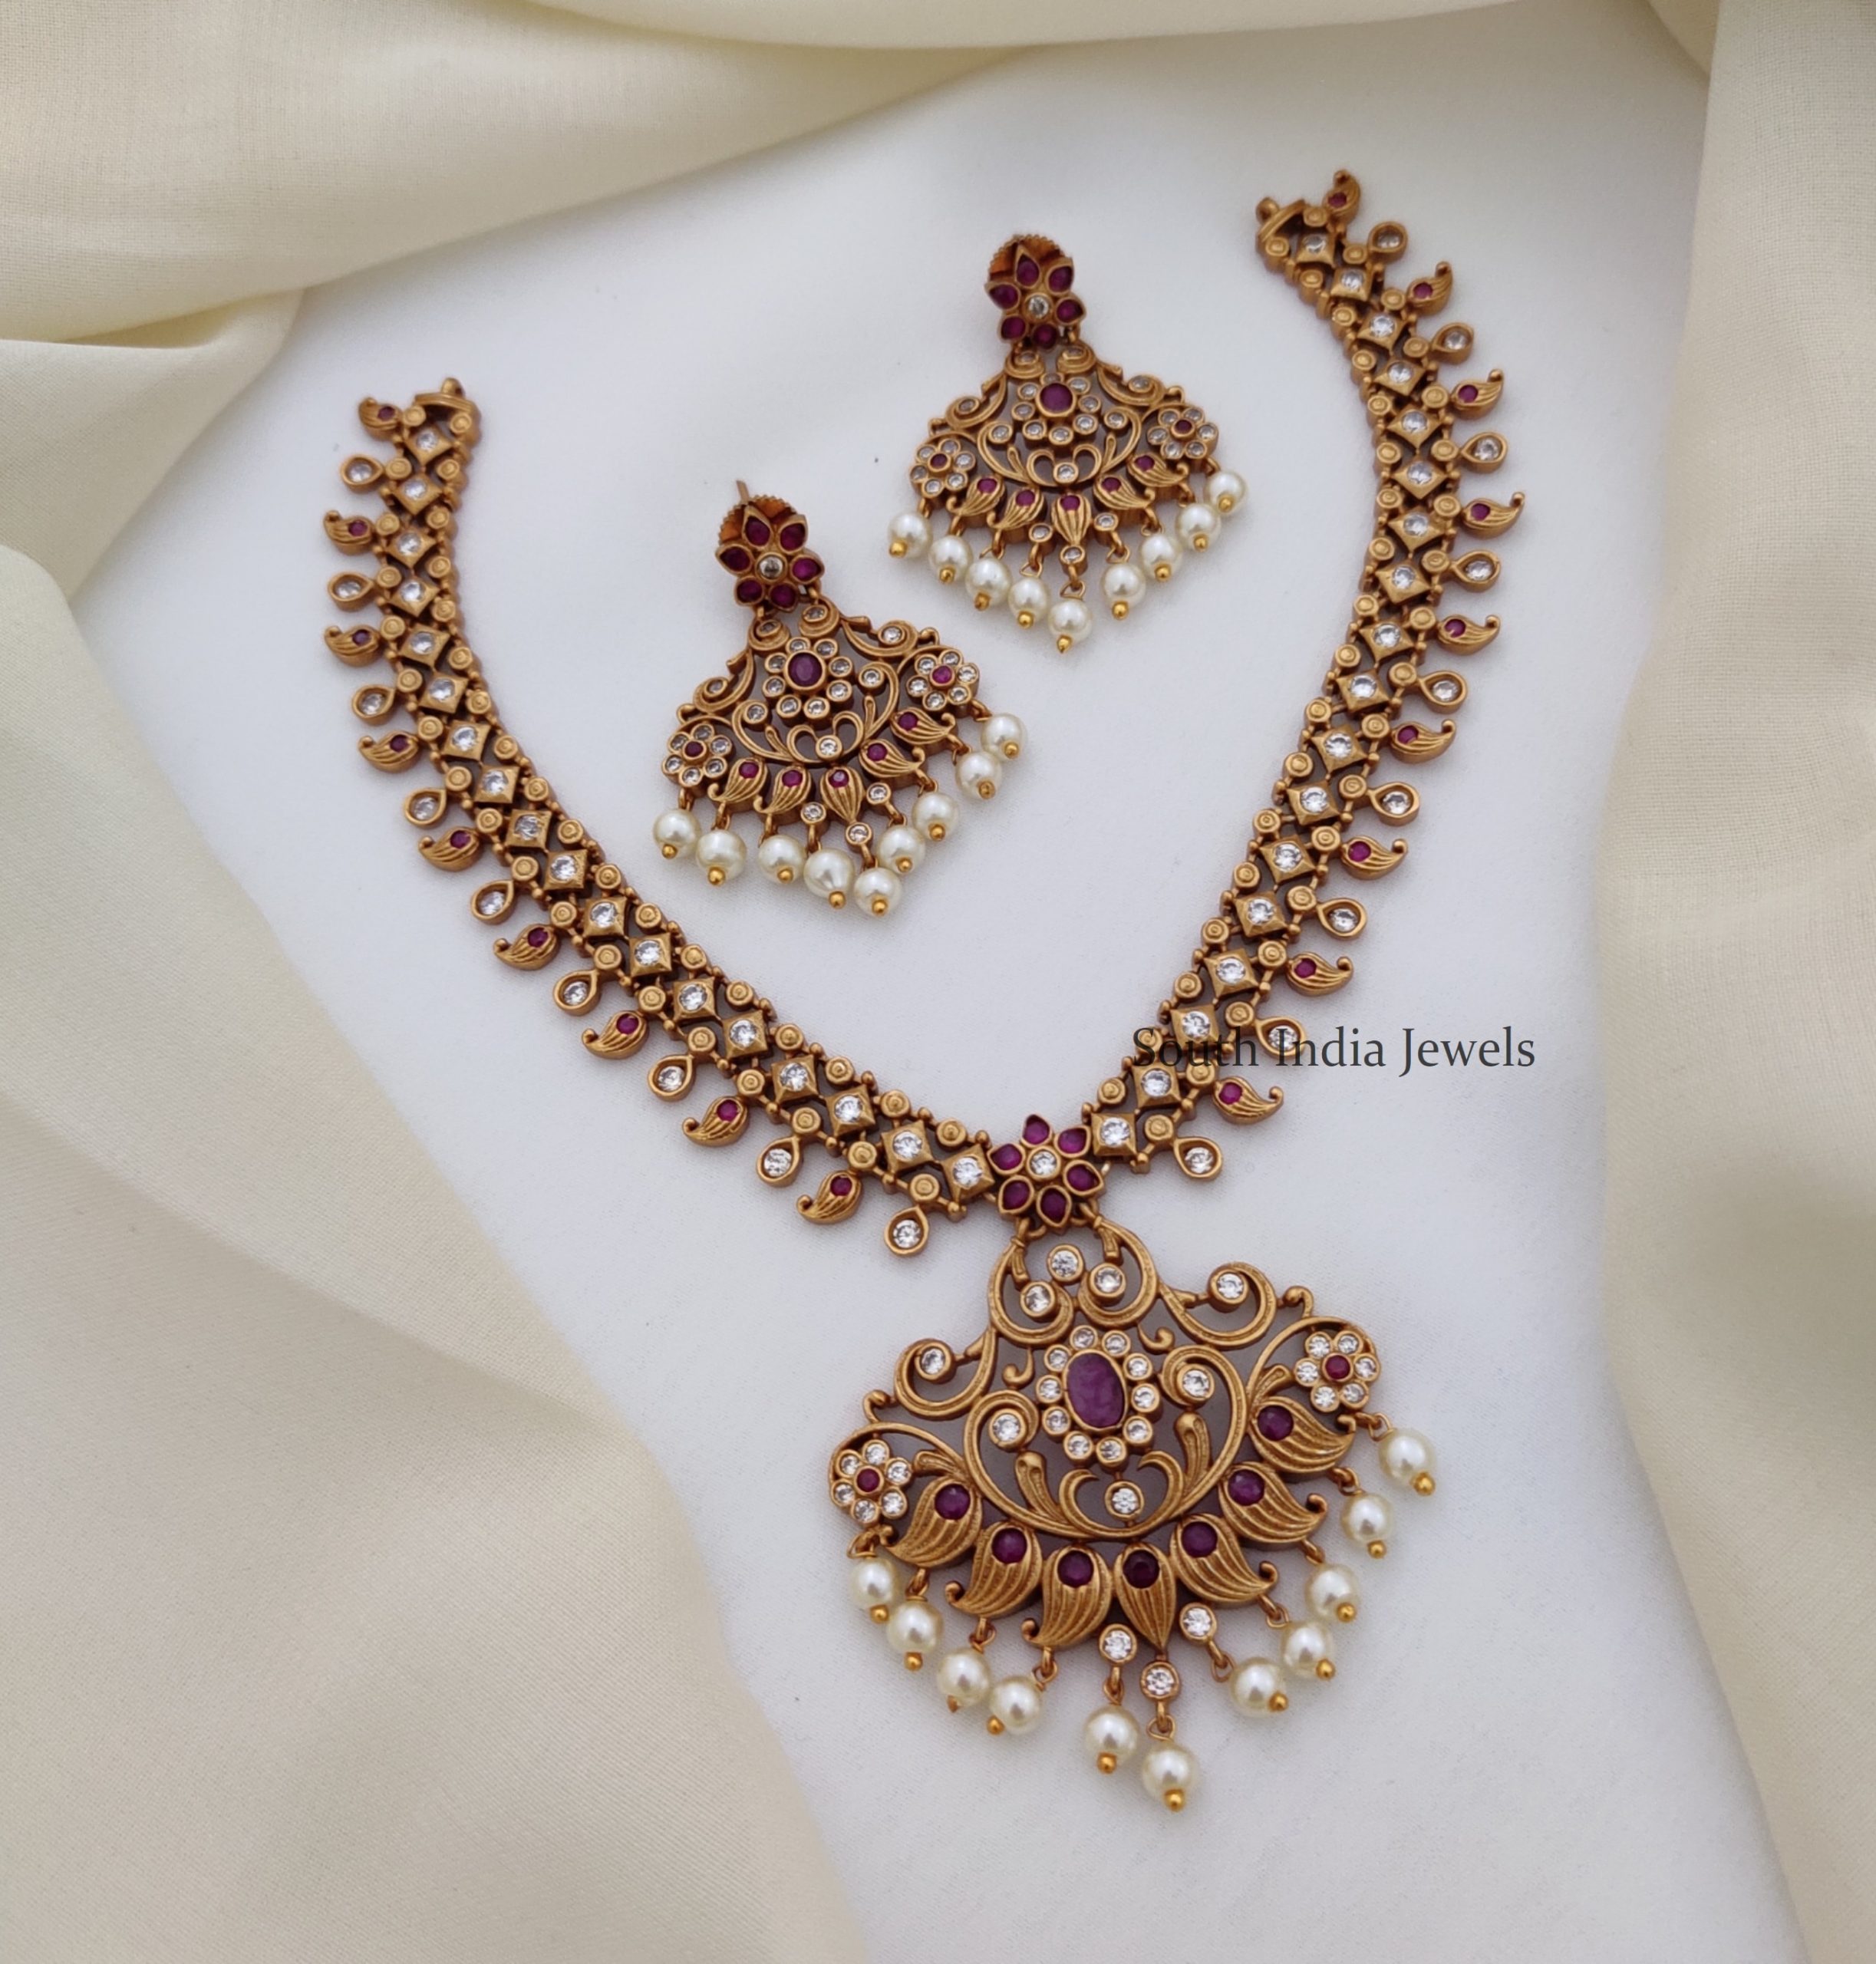 Trendy Ruby and White AD Necklace - South India Jewels